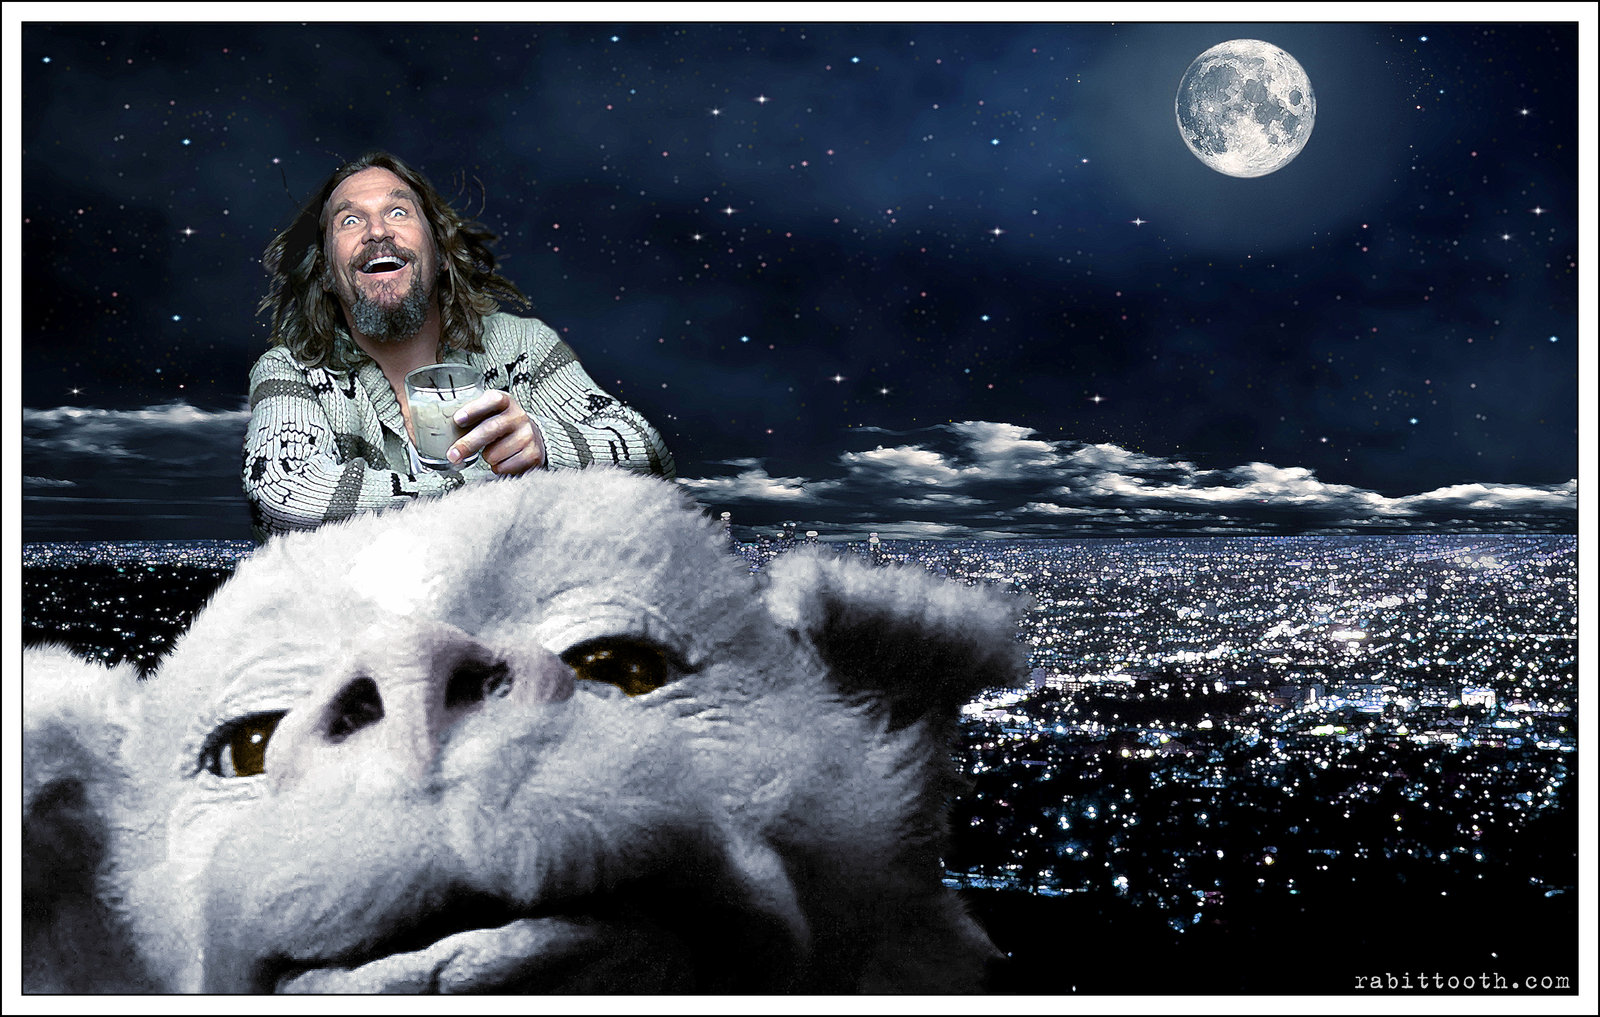 Falcor Lebowski Neverending Story By Rabittooth